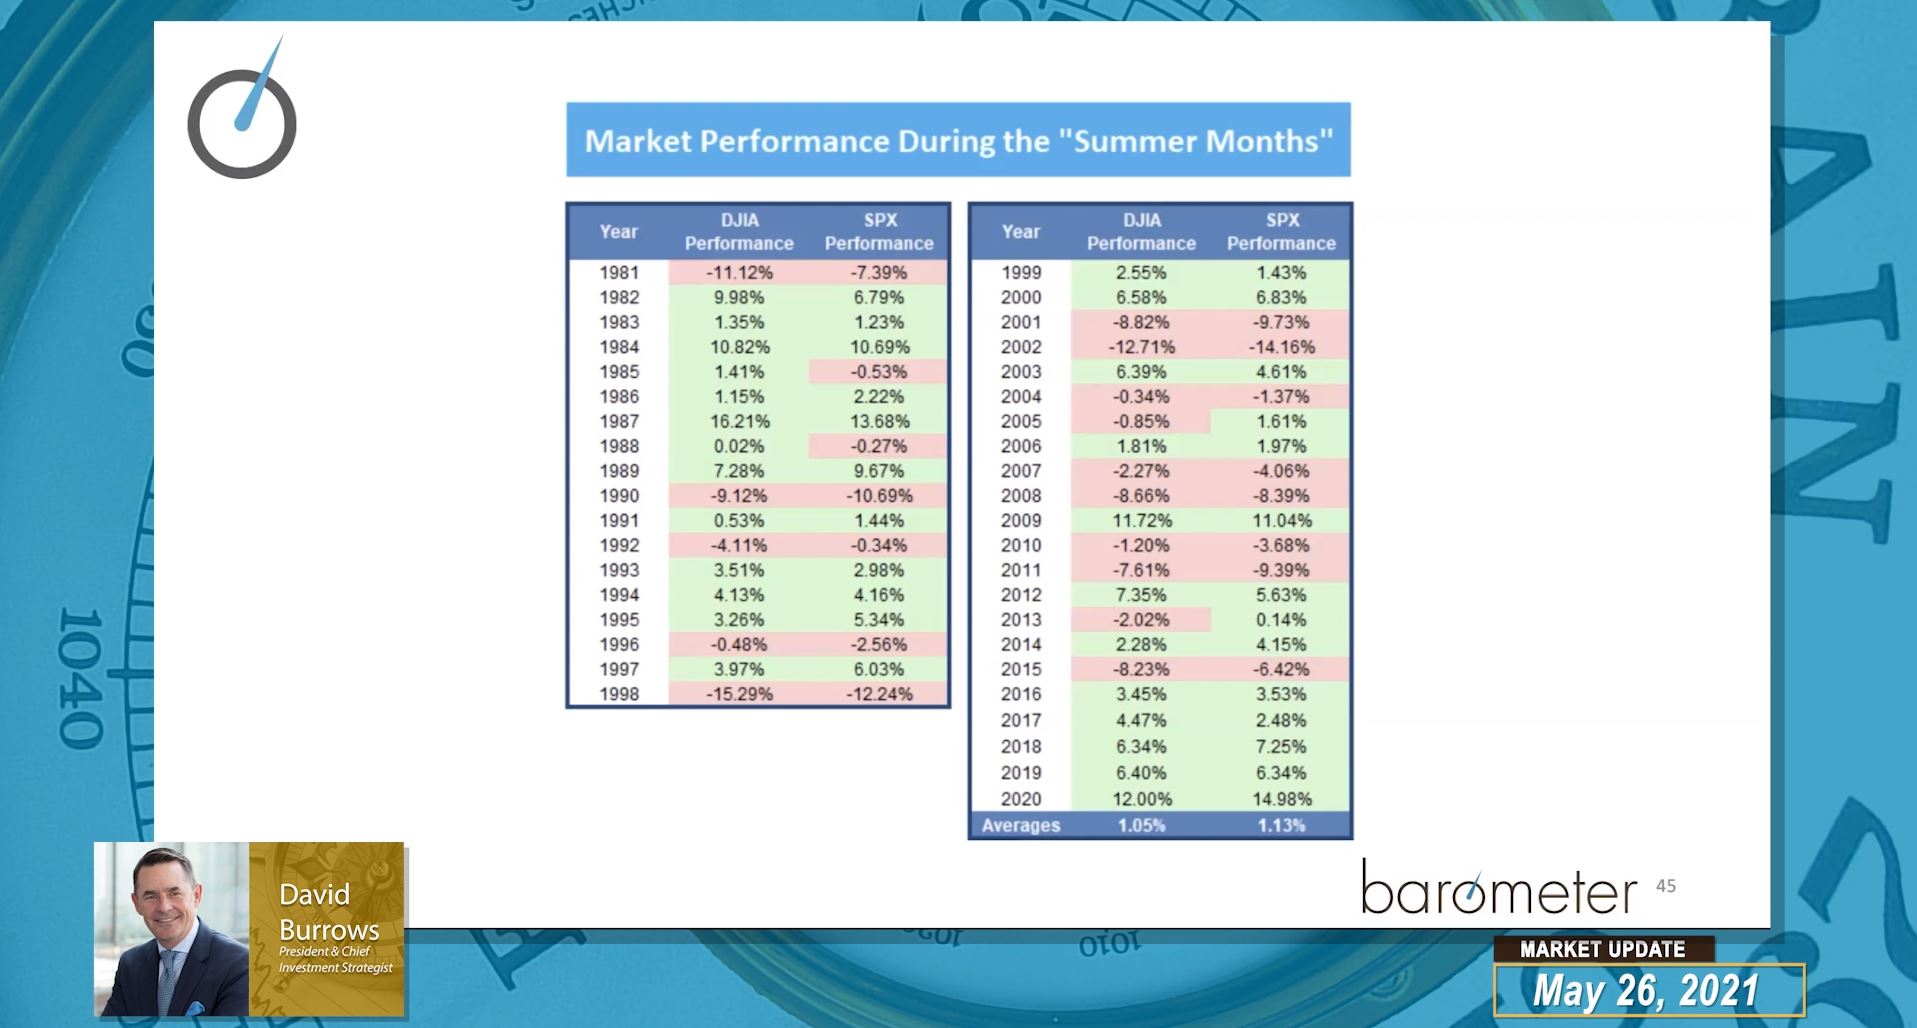 WEEKLY BAROMETER READINGS (VIDEO) – DAVID BURROWS DISCUSSESS MARKET CONDITIONS, KEY THEMES & VALUE LEADERSHIP, BREADTH OVERVIEW, SUMMER MONTHS